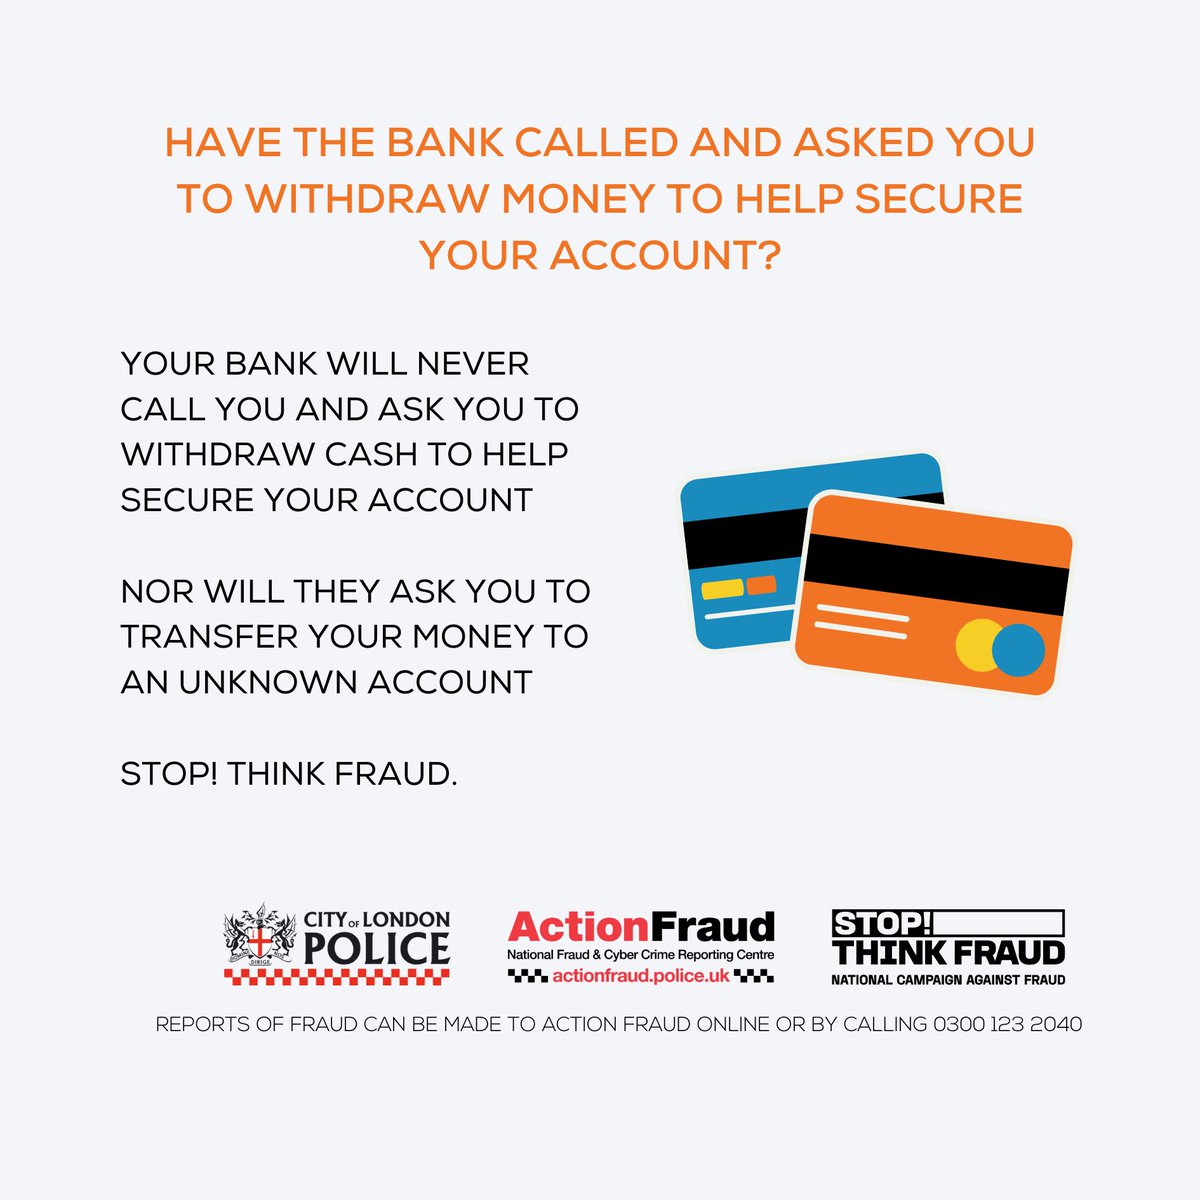 Your bank will never contact you and ask you to withdraw cash to help secure your account. This is a tell-tale sign of courier fraud. Dial 999 if this happens and even if you haven’t lost any money, also make a report to Action Fraud at actionfraud.police.uk